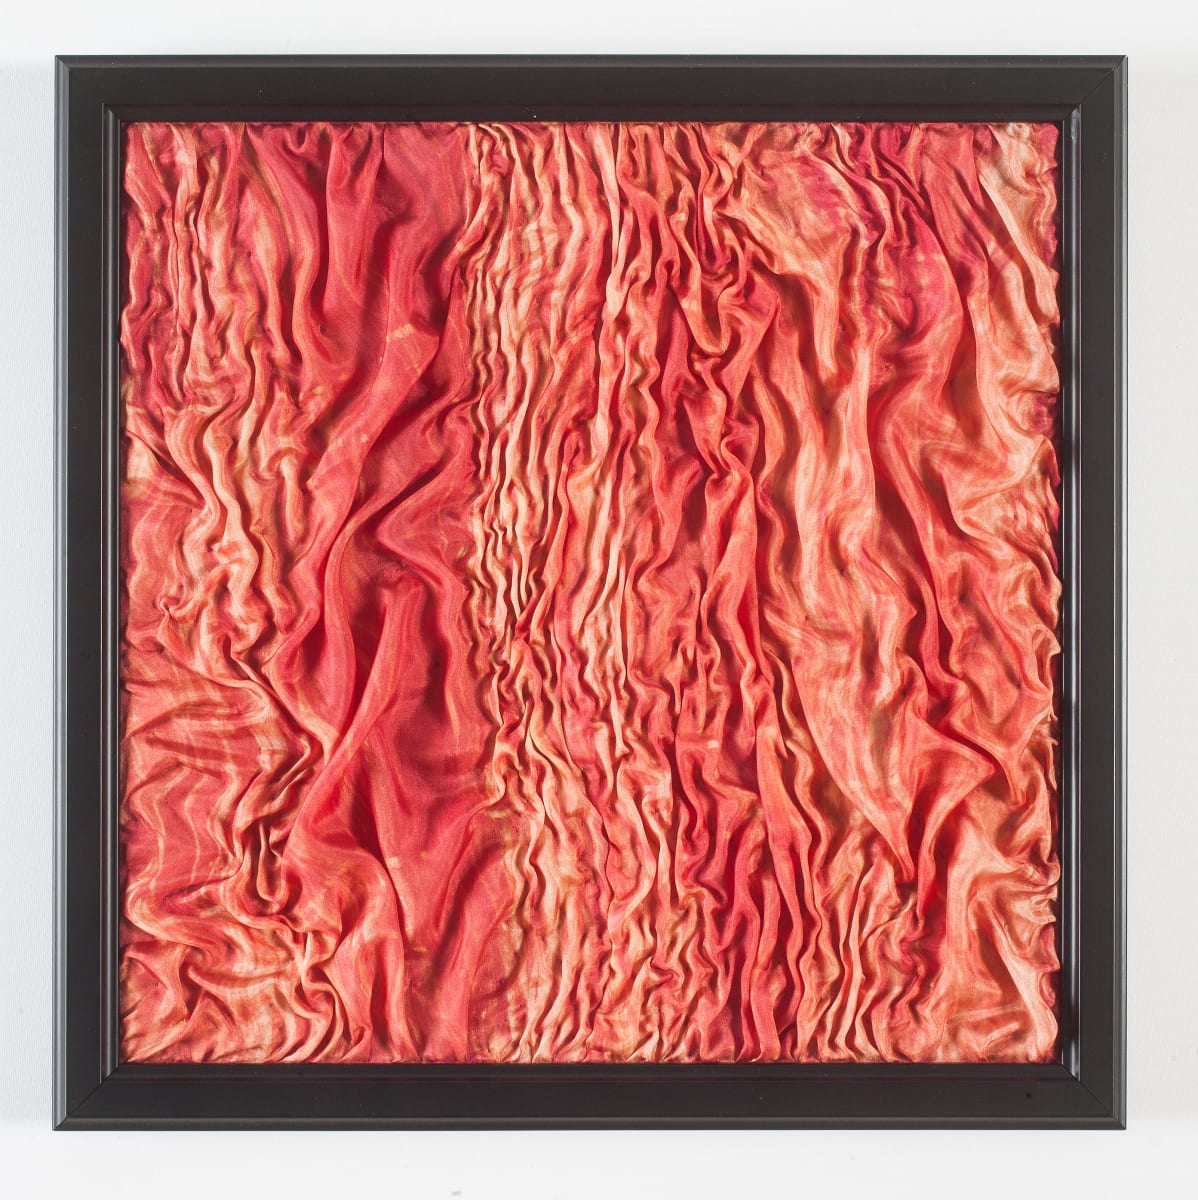 Synesthesia #20 Orange-red by Lesley Turner  Image: Lesley Turner, 'Synesthesia #20 Orange-red', 2017, 13"x13"x0.5". Silk and cotton fabric, cotton thread. Working monochromatically I focused on expressing the color’s radiating energy through line and value.  Photo: Tony Bounsall Photo-Design